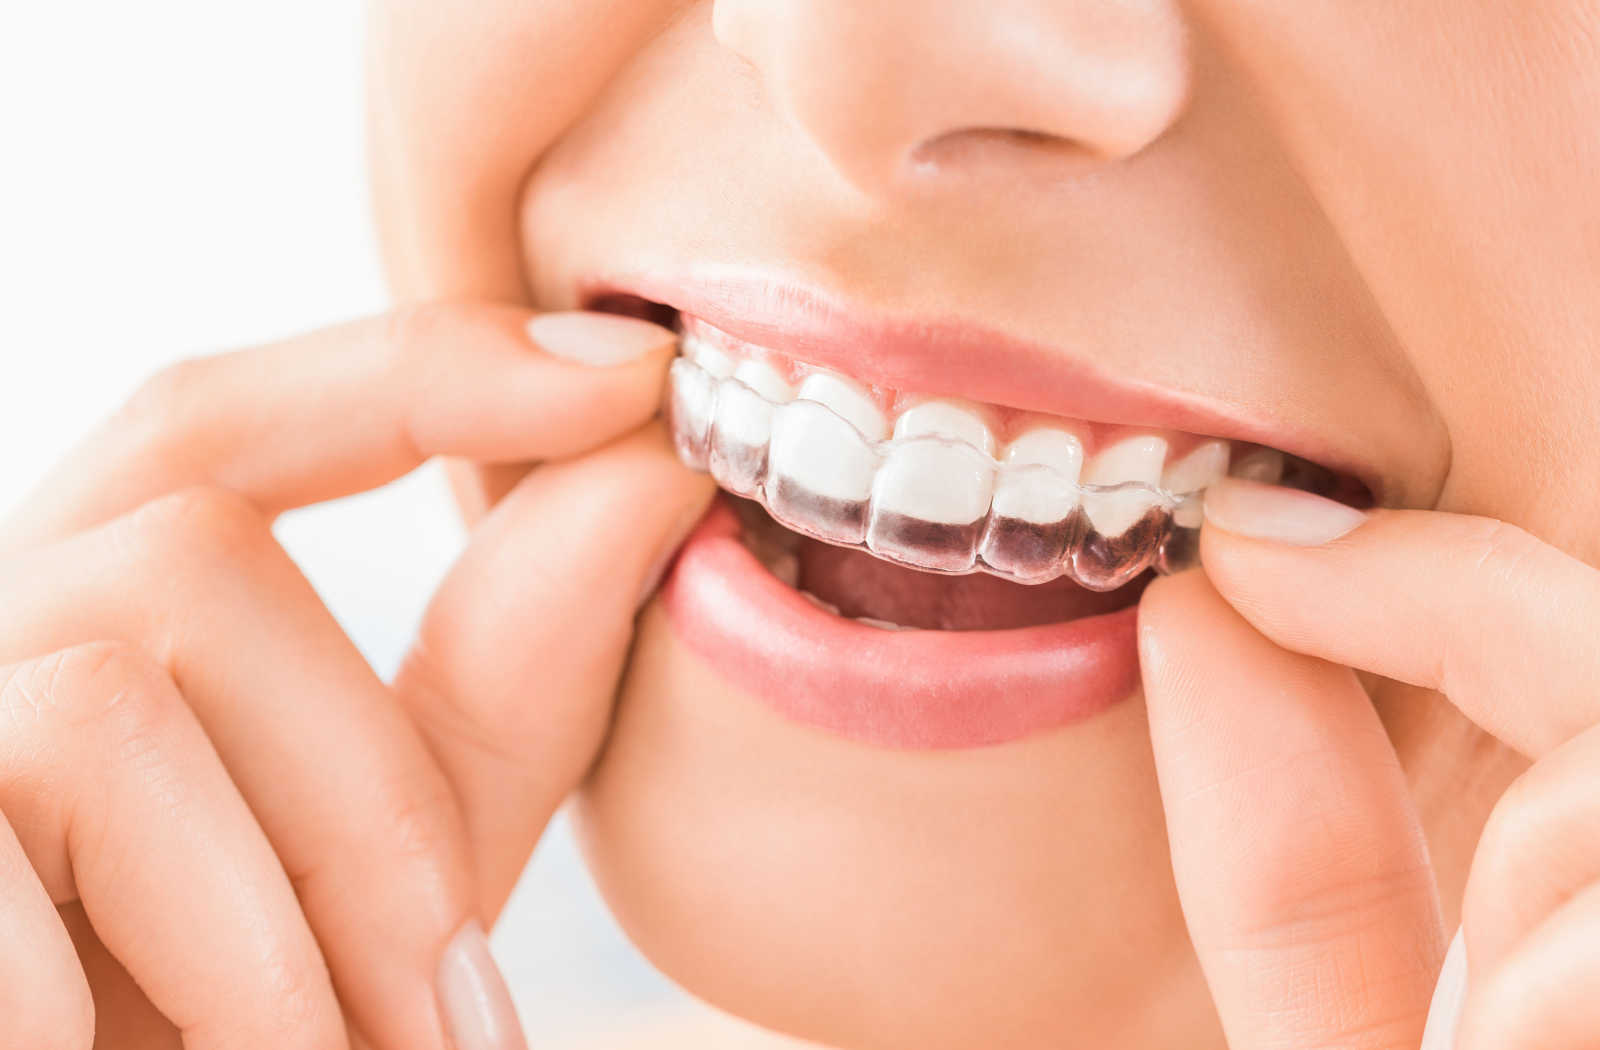 How Much Does Invisalign Cost in Edmonton?